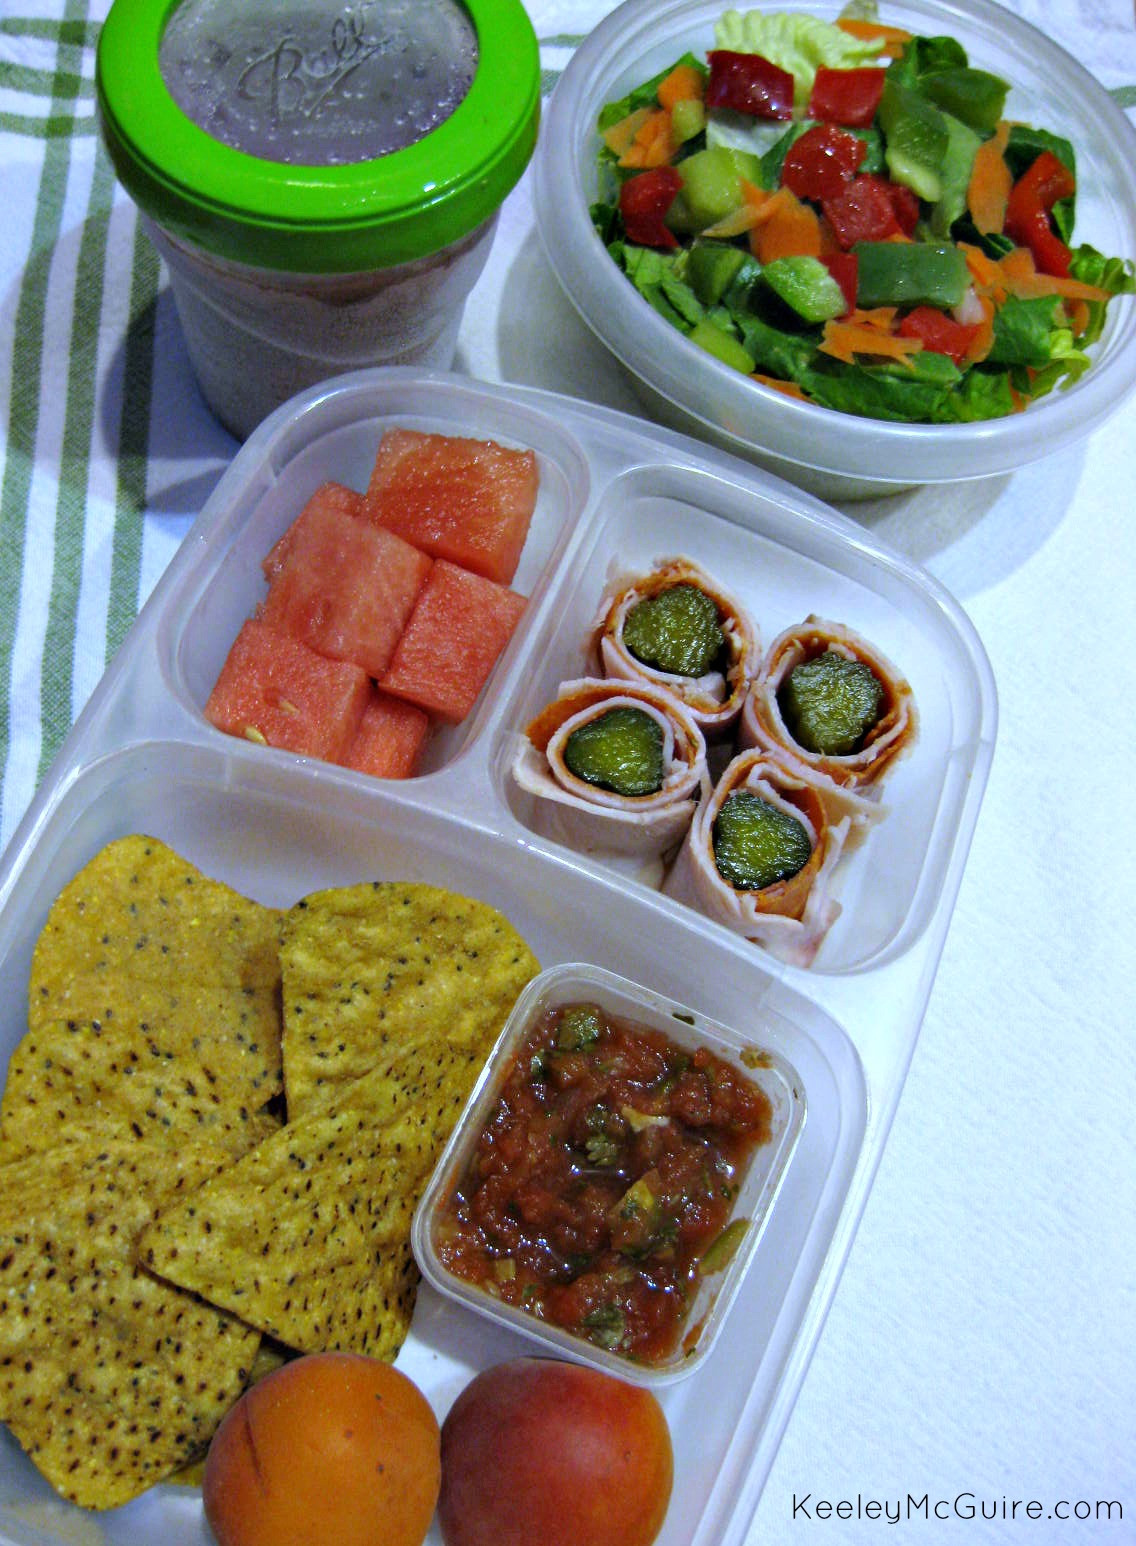 Healthy Adult Lunches
 Gluten Free & Allergy Friendly Lunch Made Easy Healthy